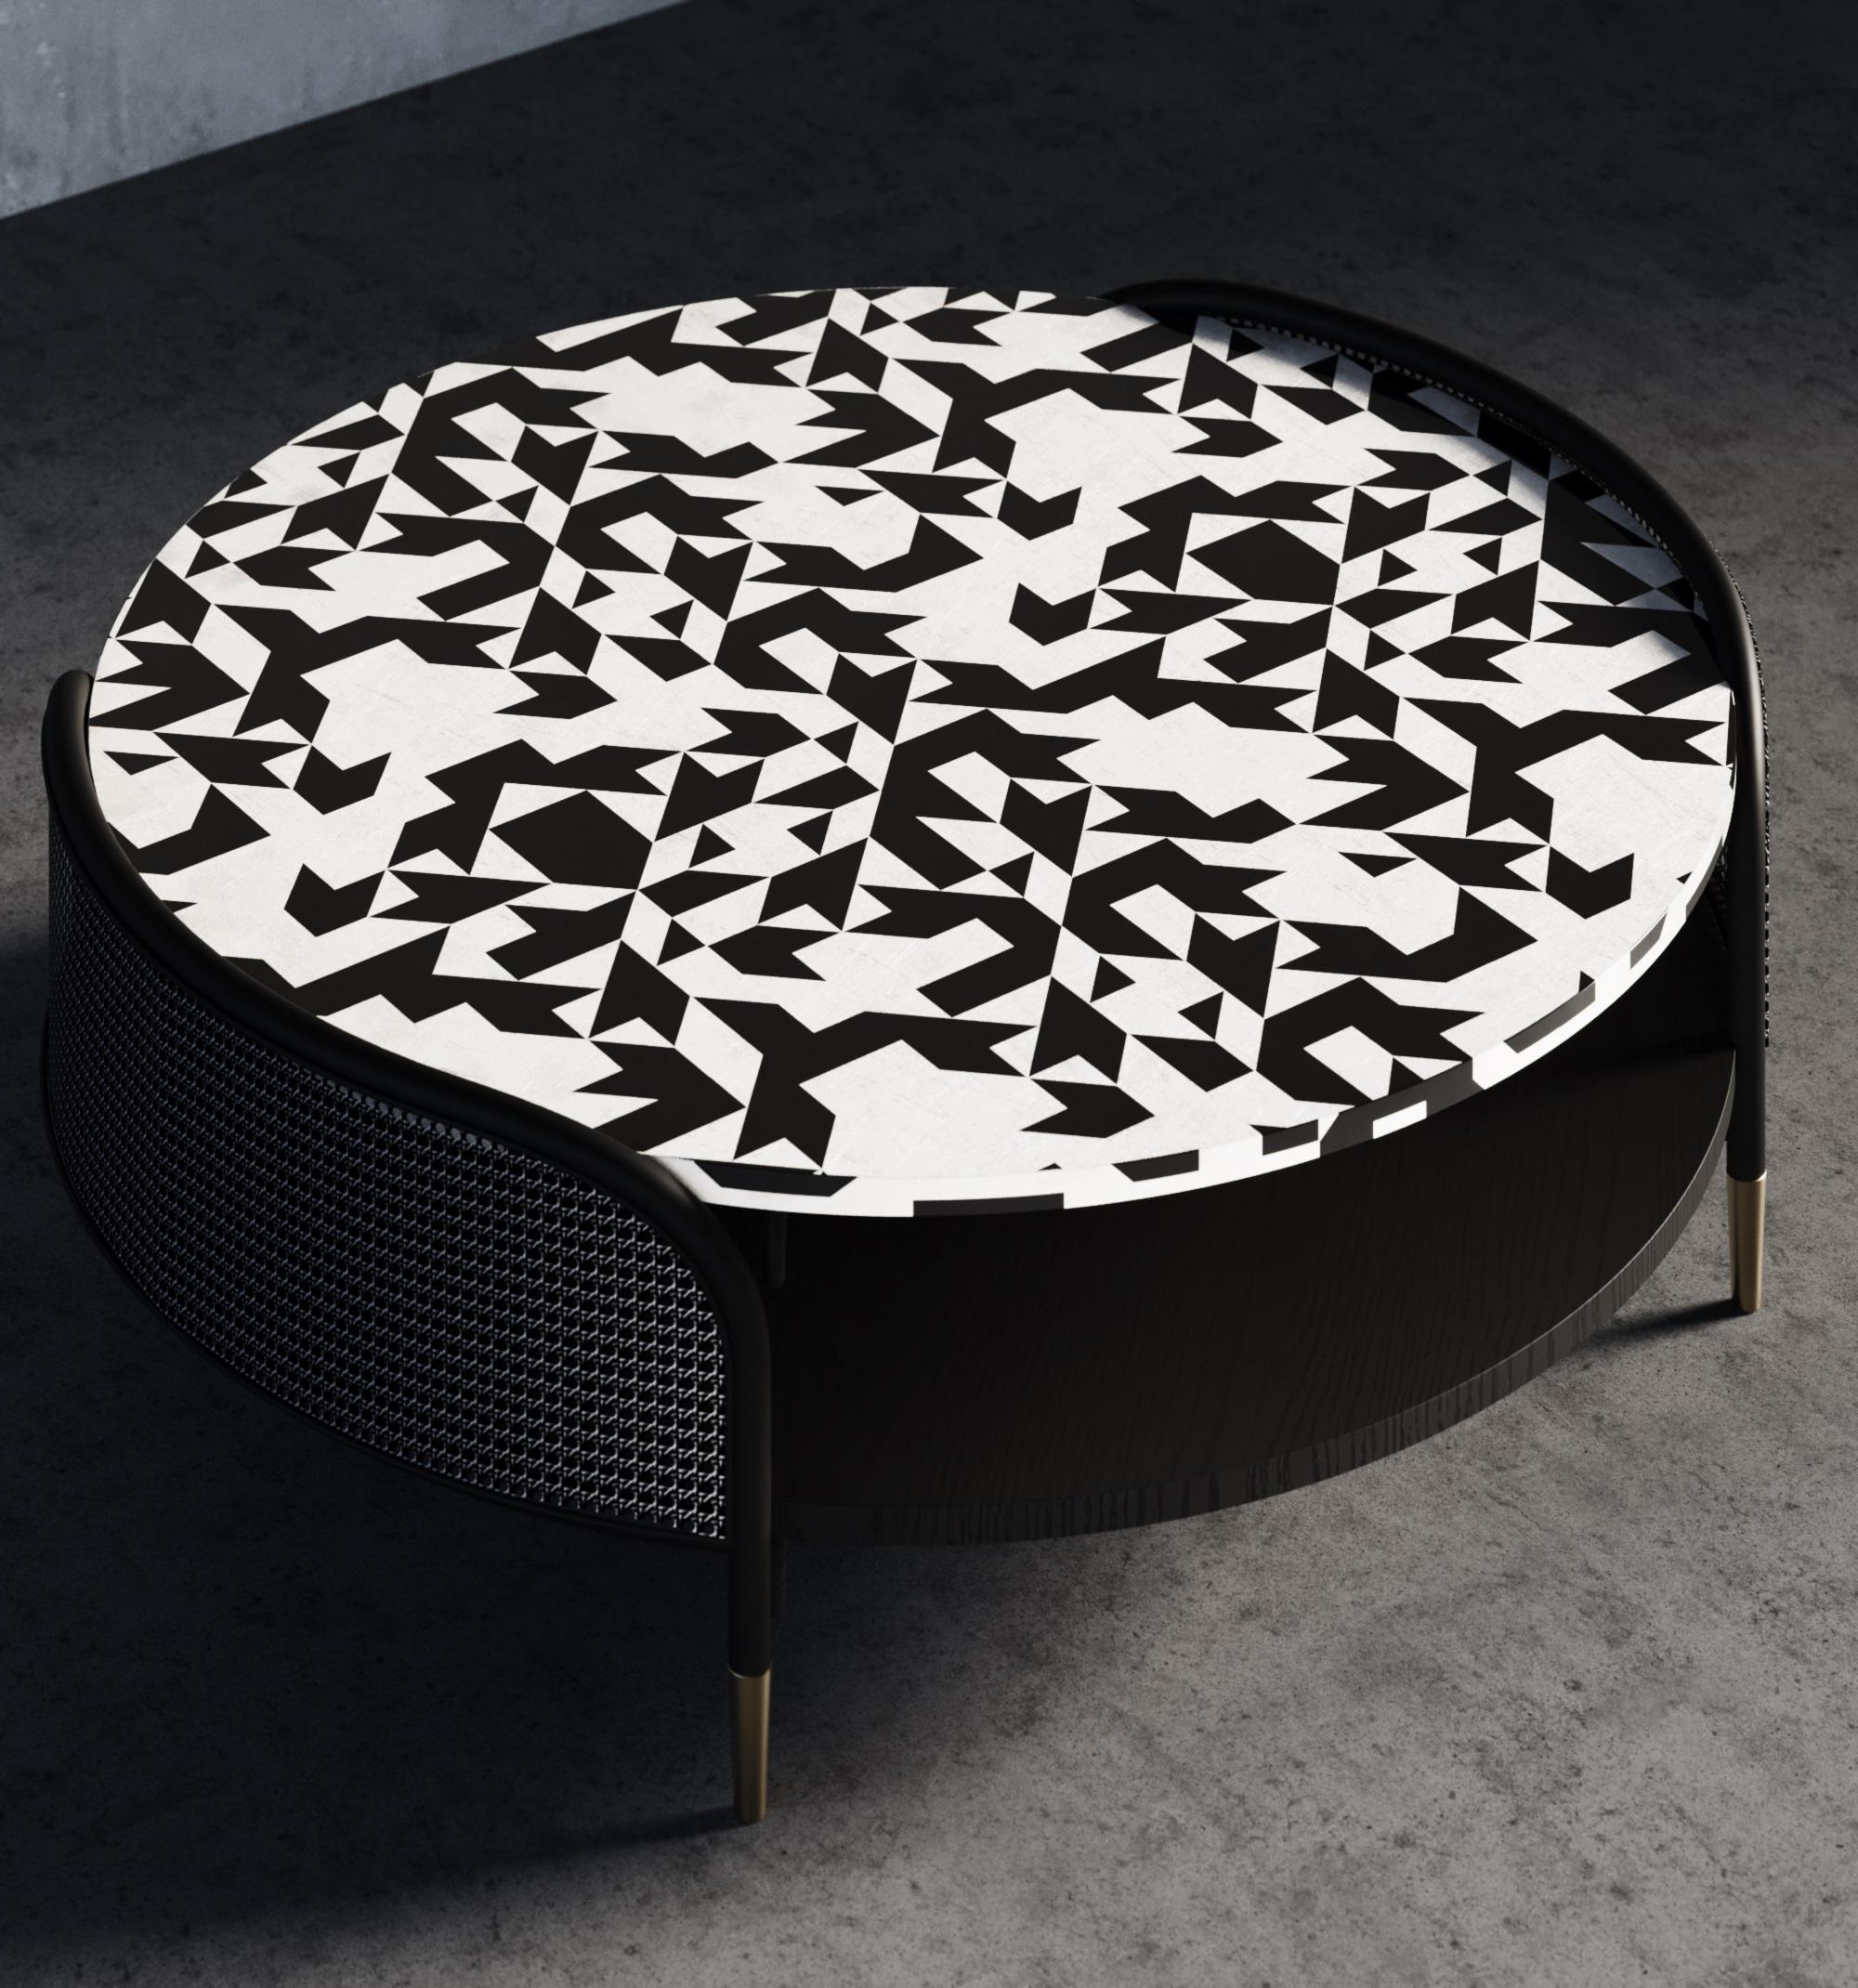 Featuring intricately patterned inlaid bone and resin Center Tables. The Noir collection creates a striking vision of geometric beauty. Our Bone Inlay collection is crafted in India by highly skilled craftsmen using traditional techniques that have